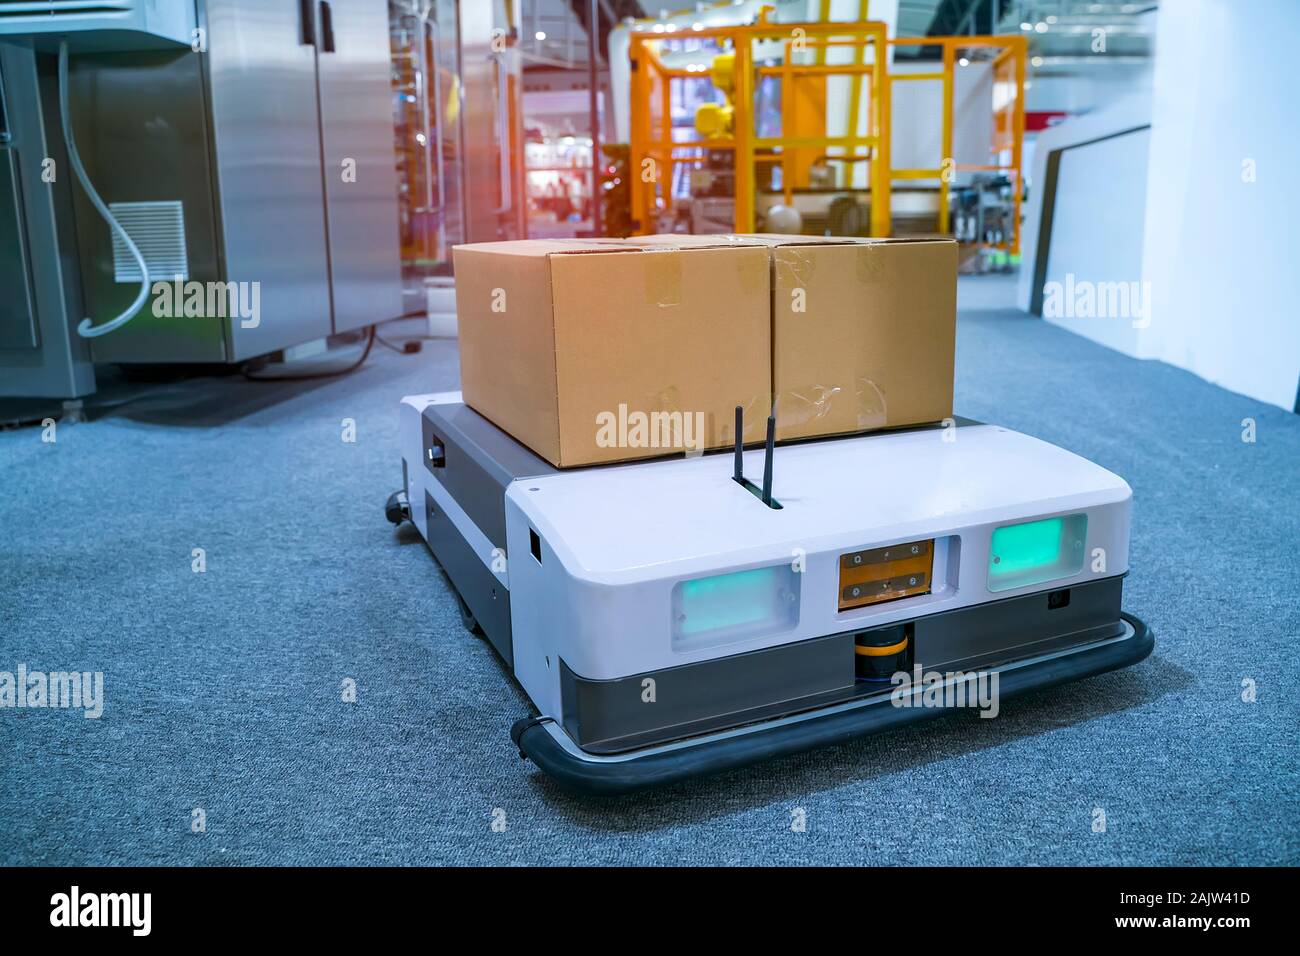 warehouse robot car carries cardboard box assembly in factory Stock Photo